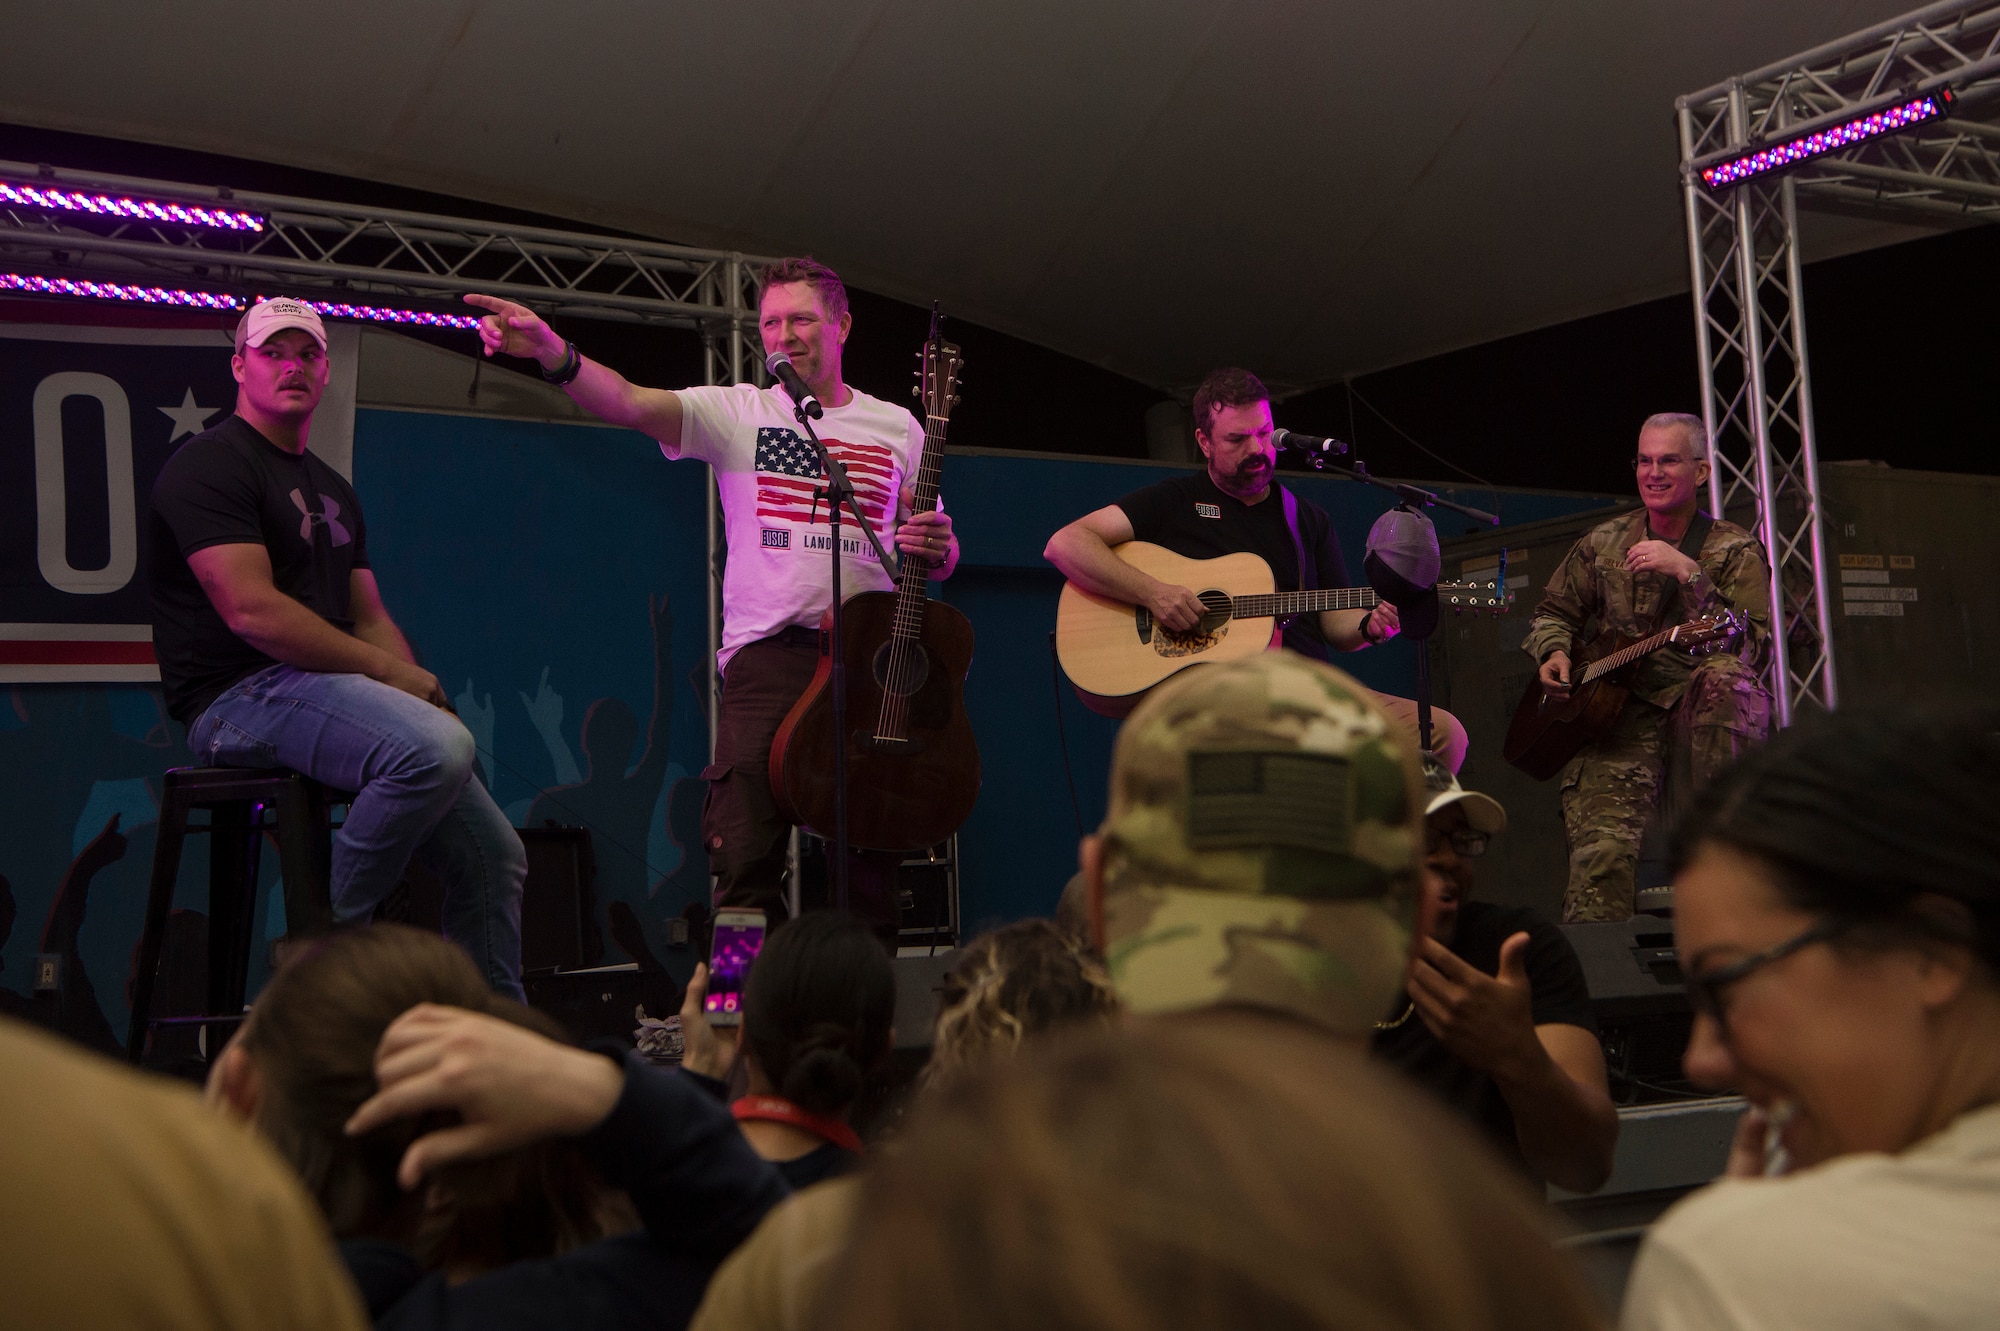 Craig Morgan, center left, country music singer and songwriter, interacts with service members alongside U.S. Air Force Gen. Paul Selva, right, Vice Chairman of the Joint Chiefs of Staff, during the United Service Organizations (USO) tour April 1, 2019, at Al Udeid Air Base, Qatar. Morgan invited service members to play guitar and sing alongside him during his performance. Selva hosted the tour alongside celebrities and performers including Morgan, Robert Irvine, and professional athletes.